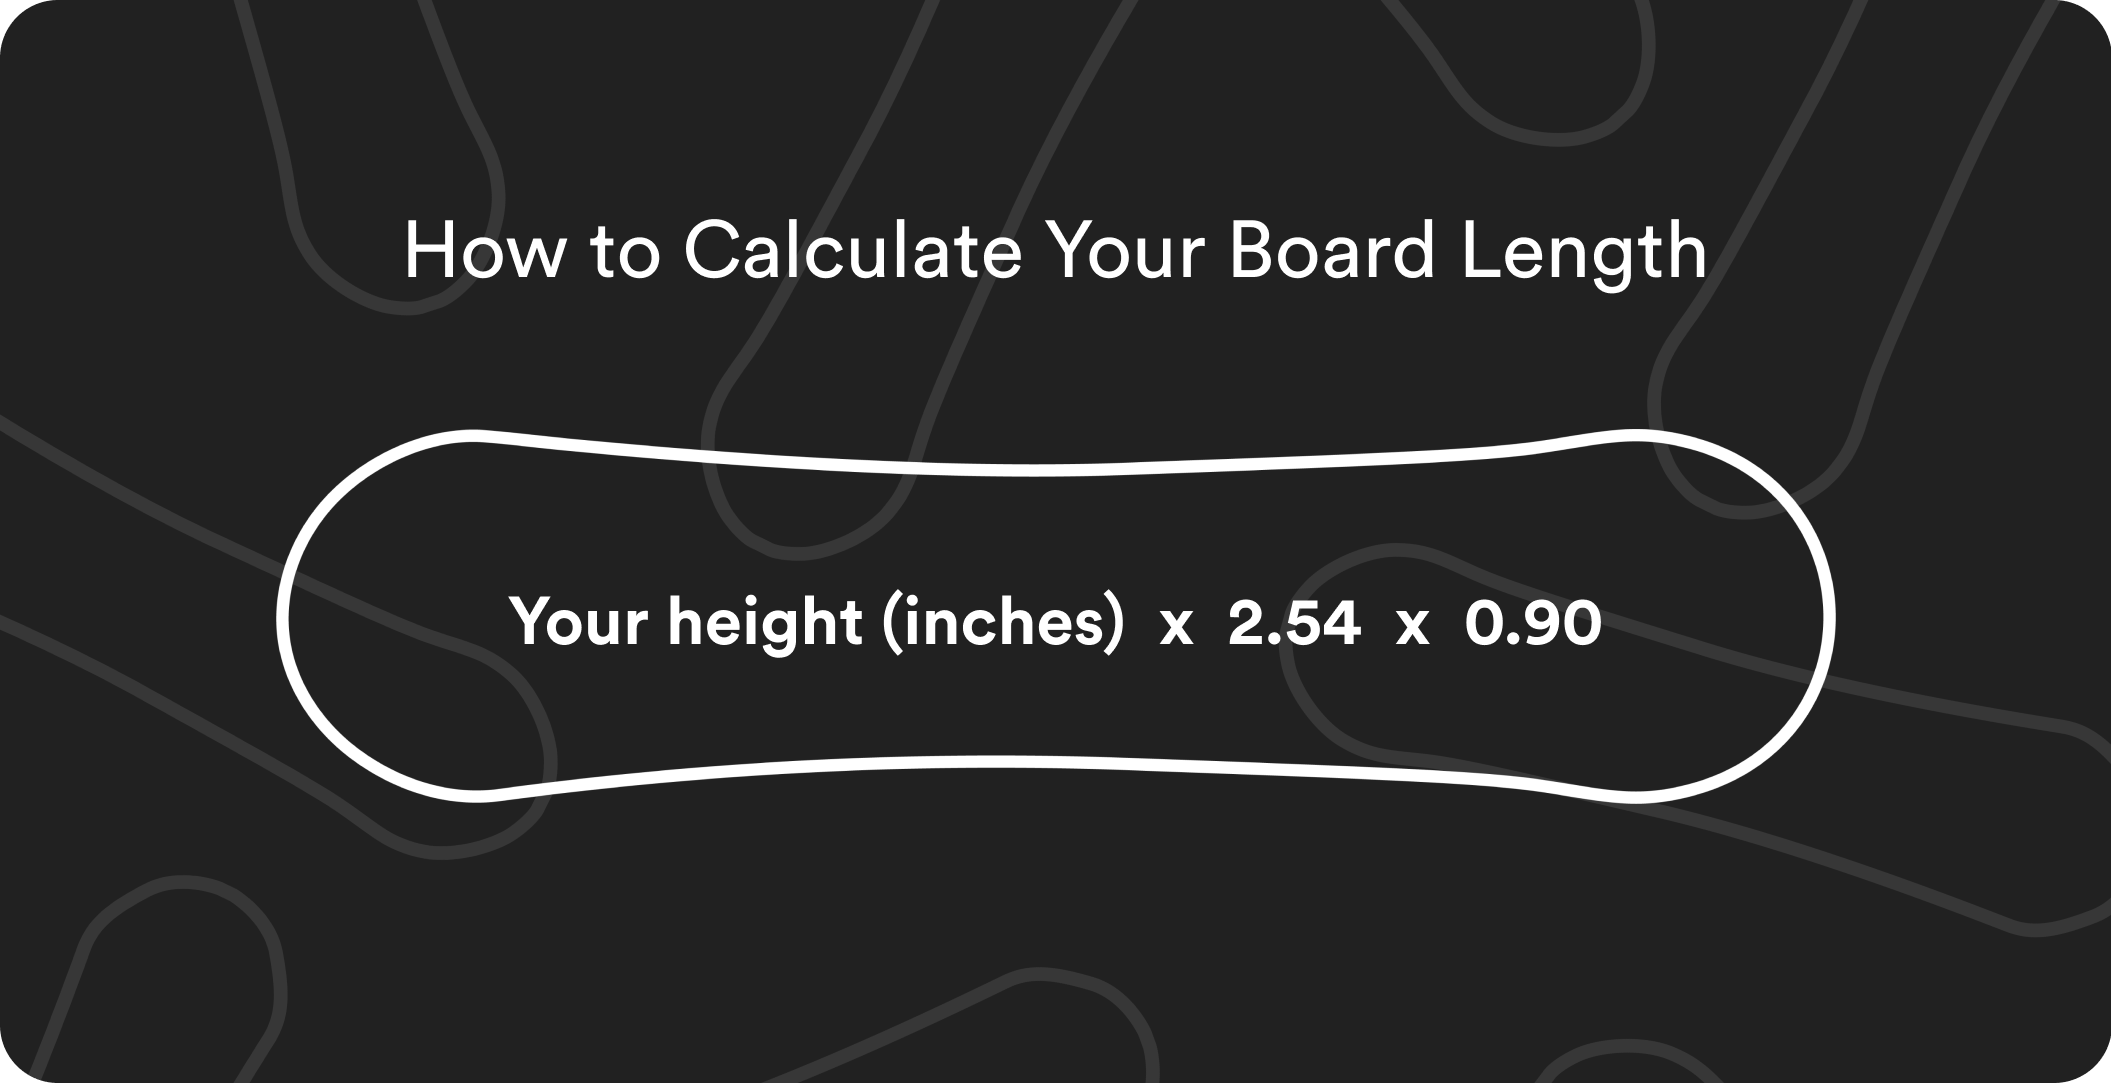 How to Choose a Snowboard & Snowboard Size Chart